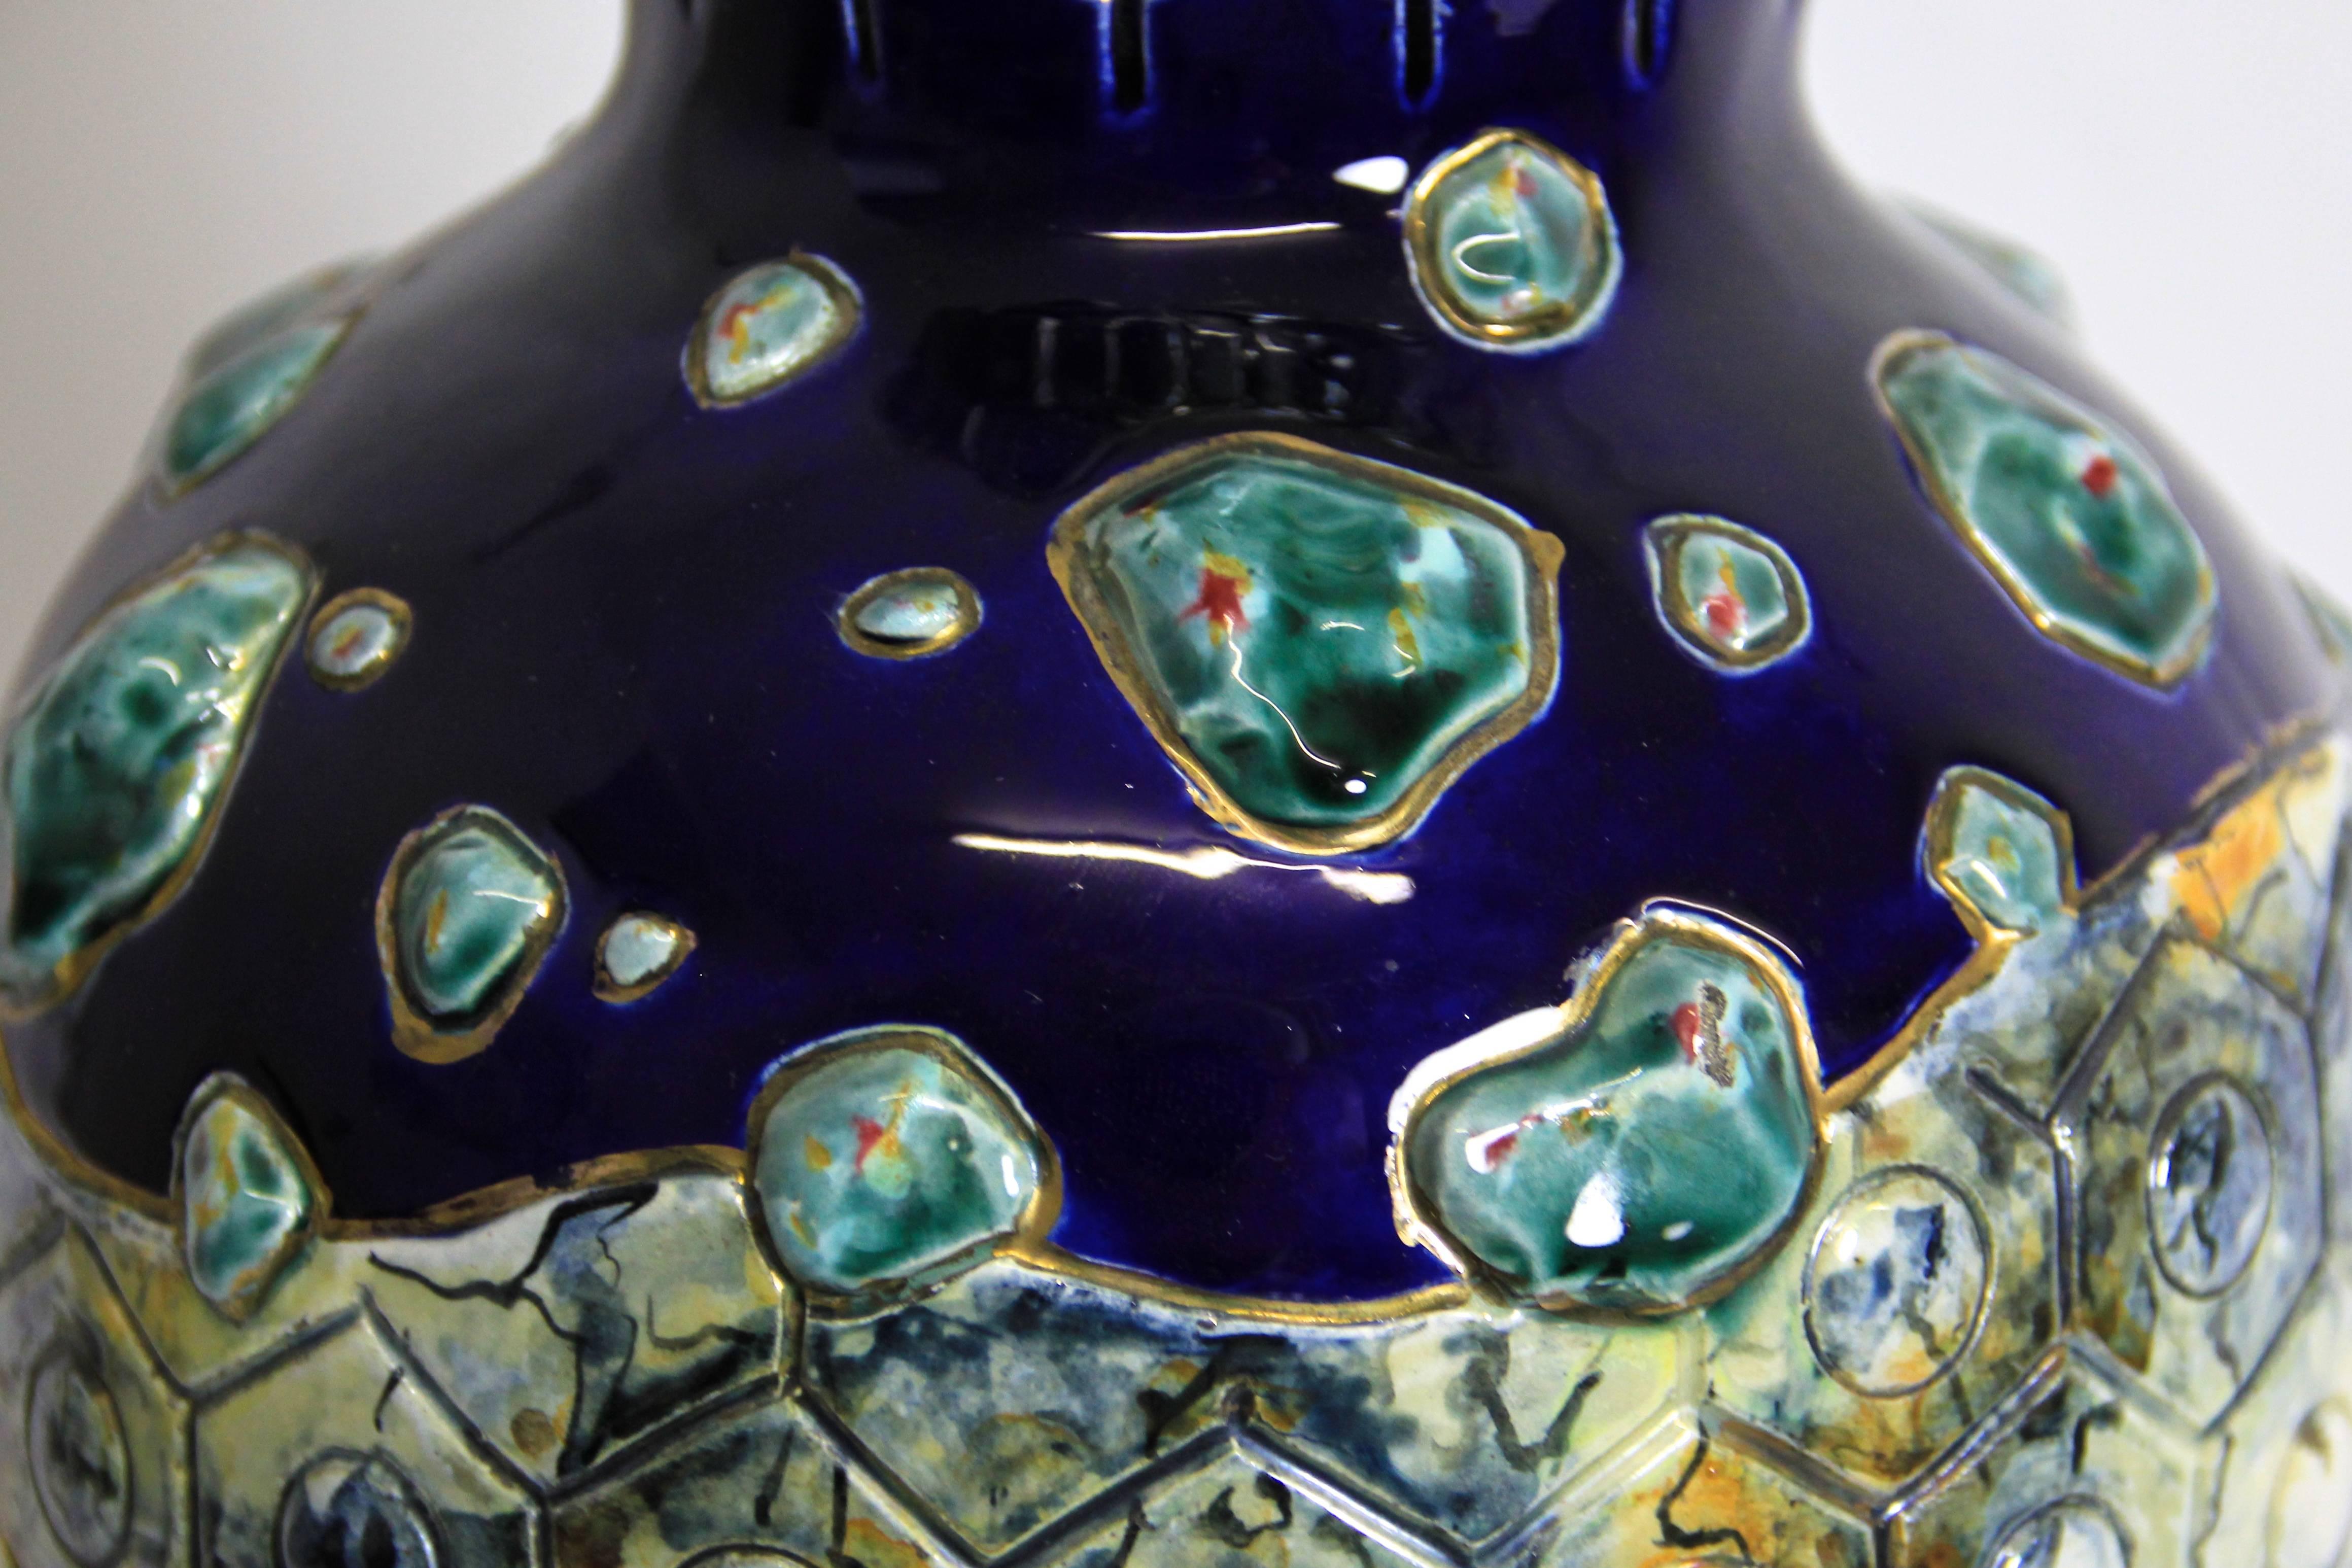 Absolute unique Majolica work by WS&S from circa 1900. This beautifully designed and blue tone colored vase shows a light 